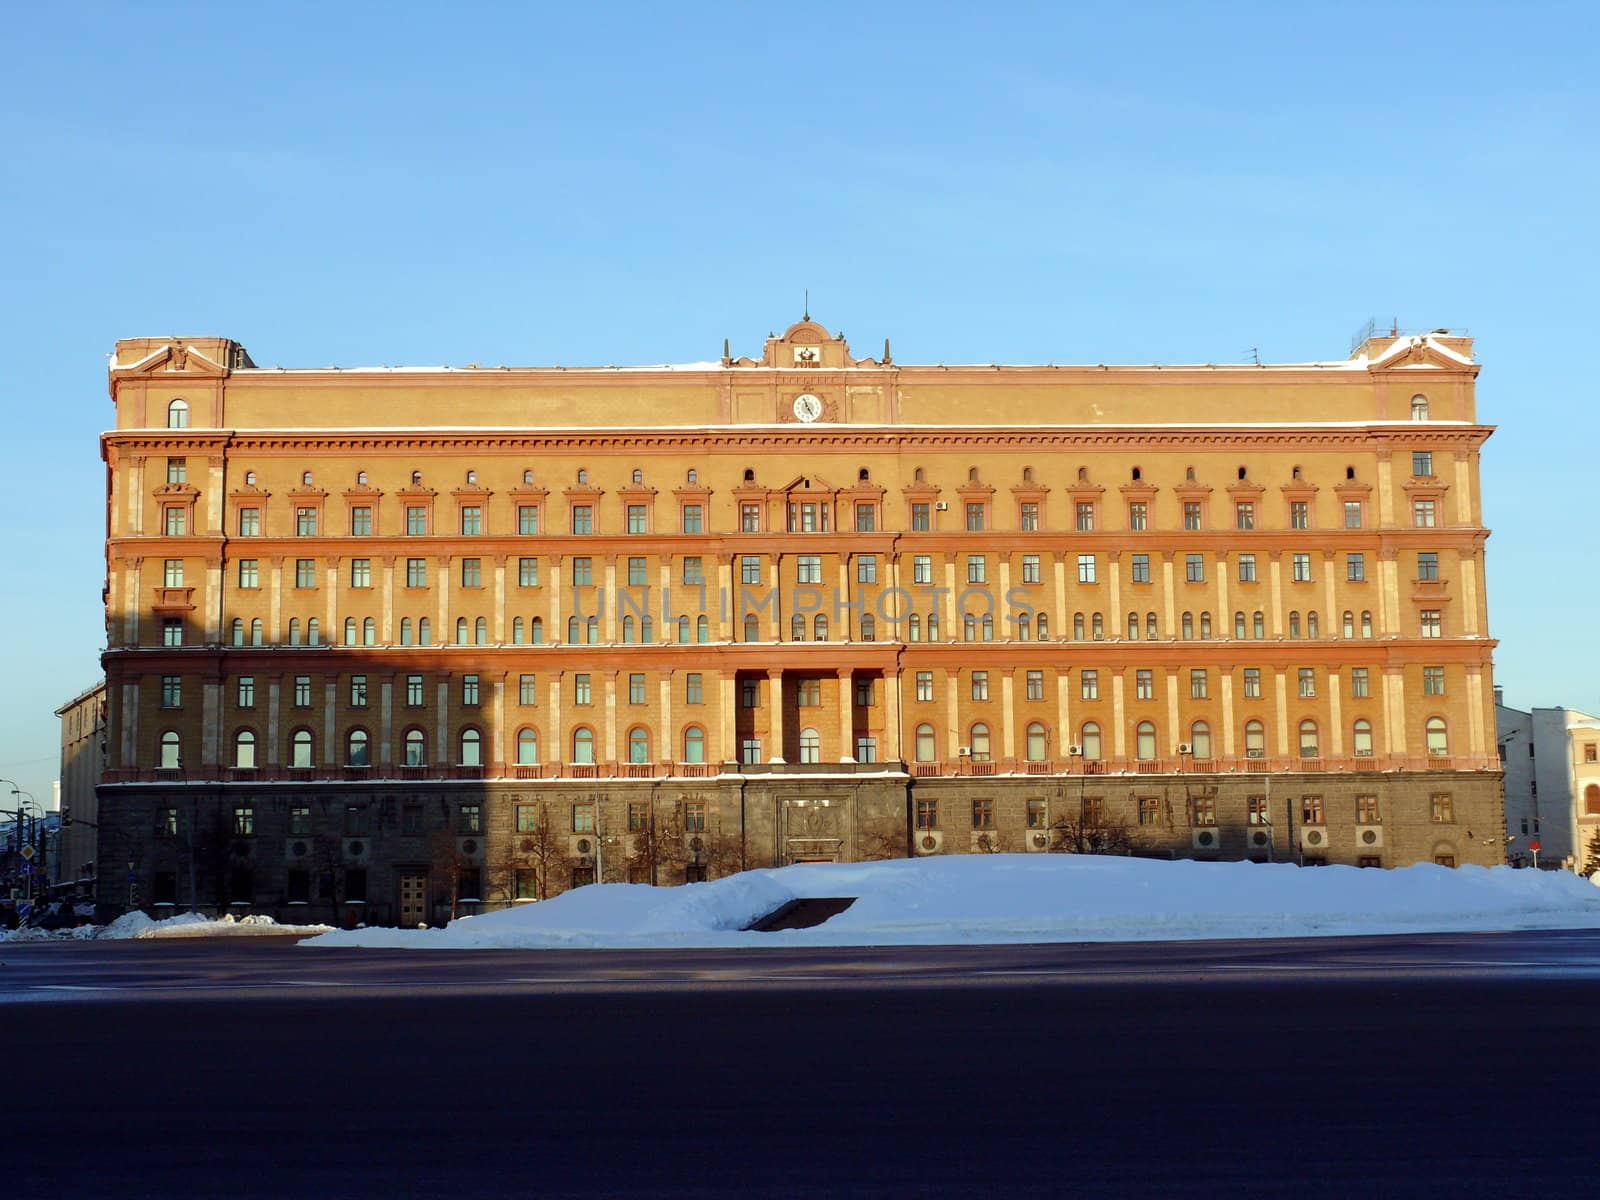 Main building of federal service of security (FSB) on Lubyanka square. Moscow, Russia